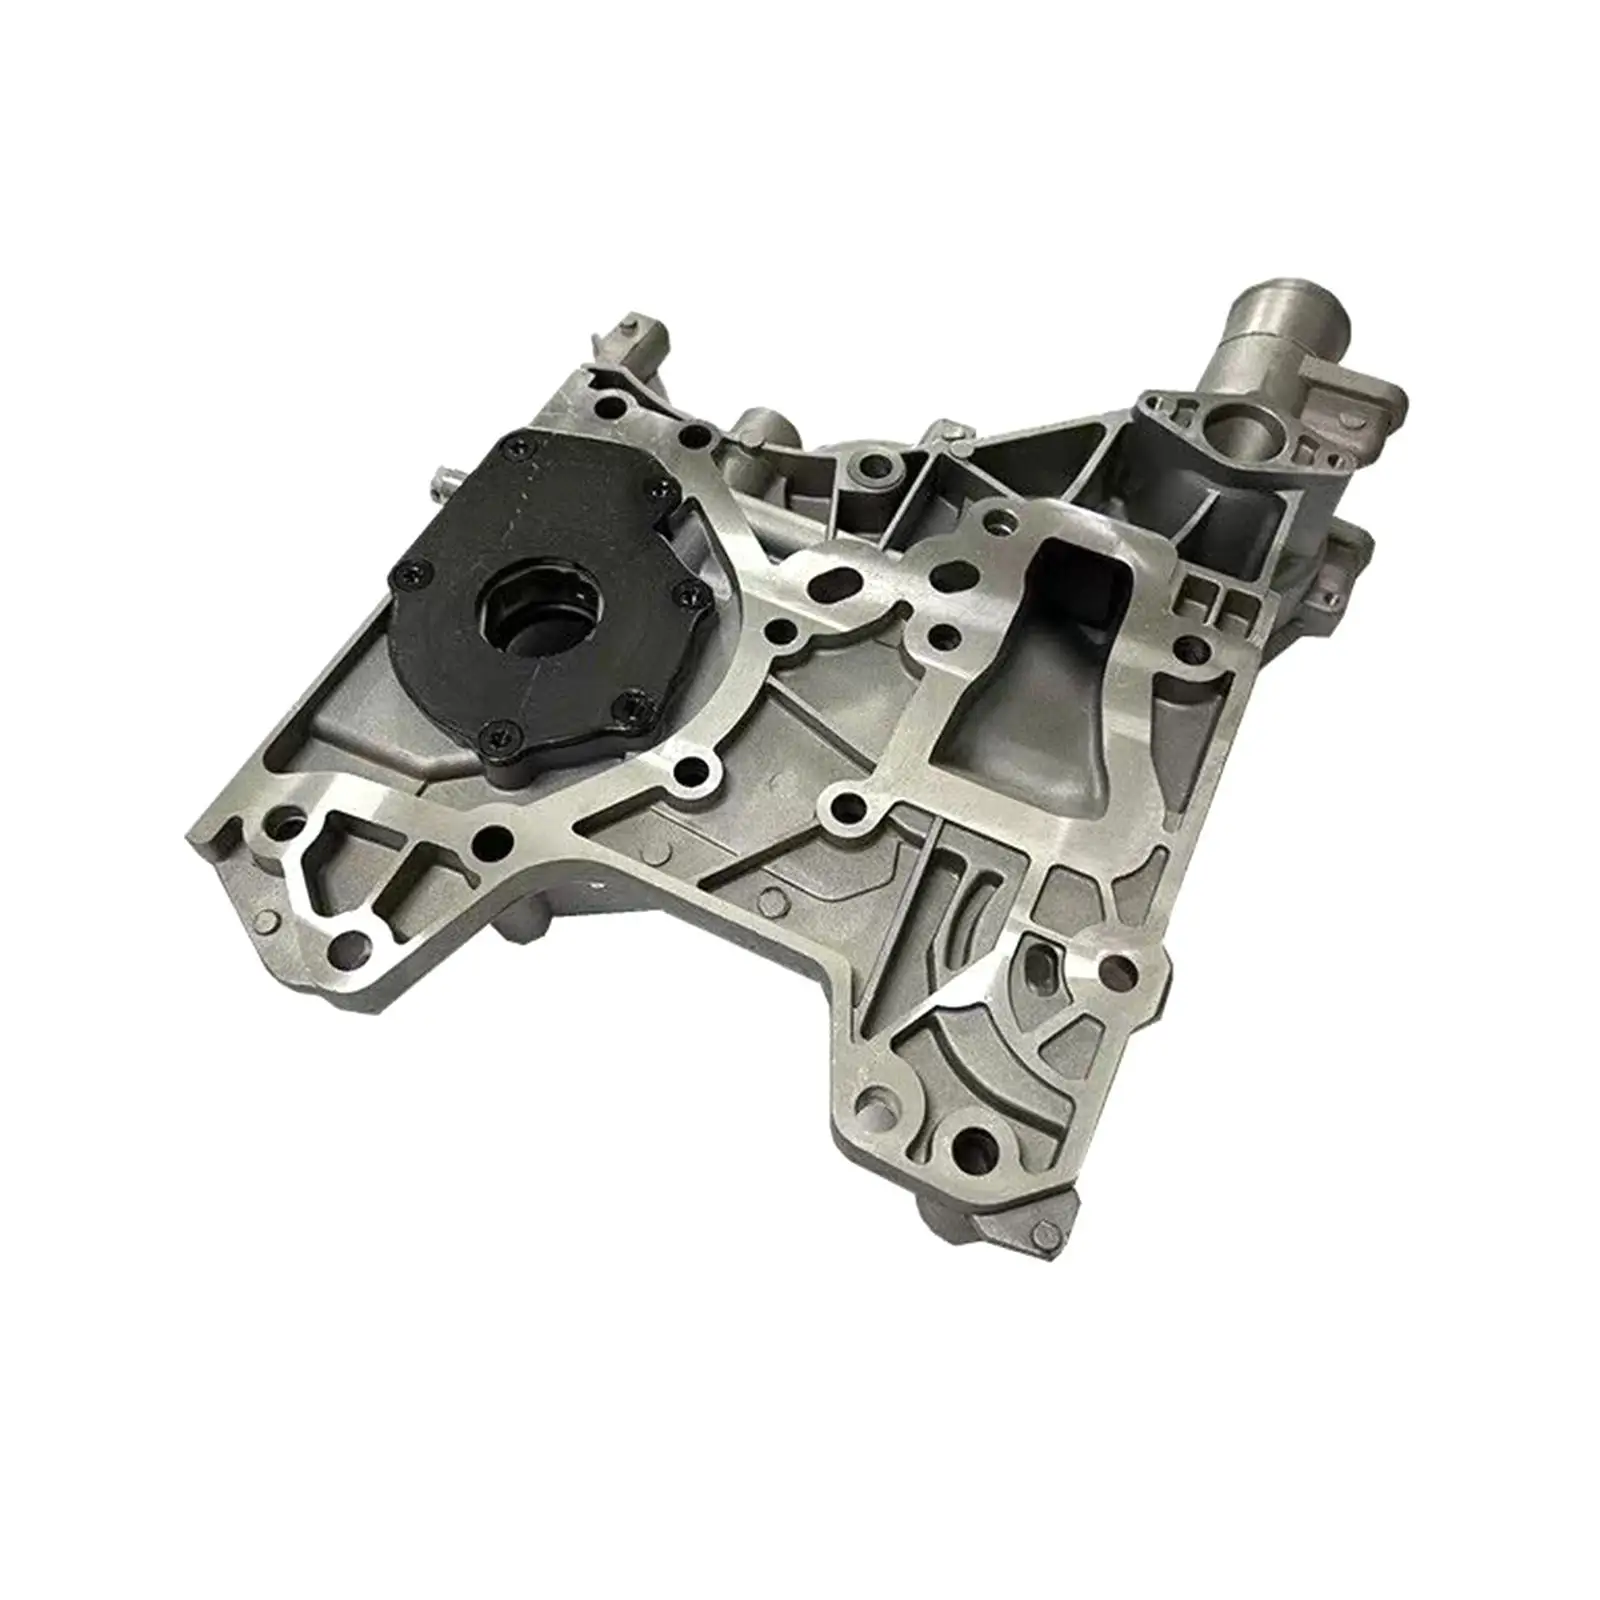 Oil Pump Timing Cover 25190897 55566793 Replacement for Insignia Zafira Convenient Installation Vehicle Repair Parts